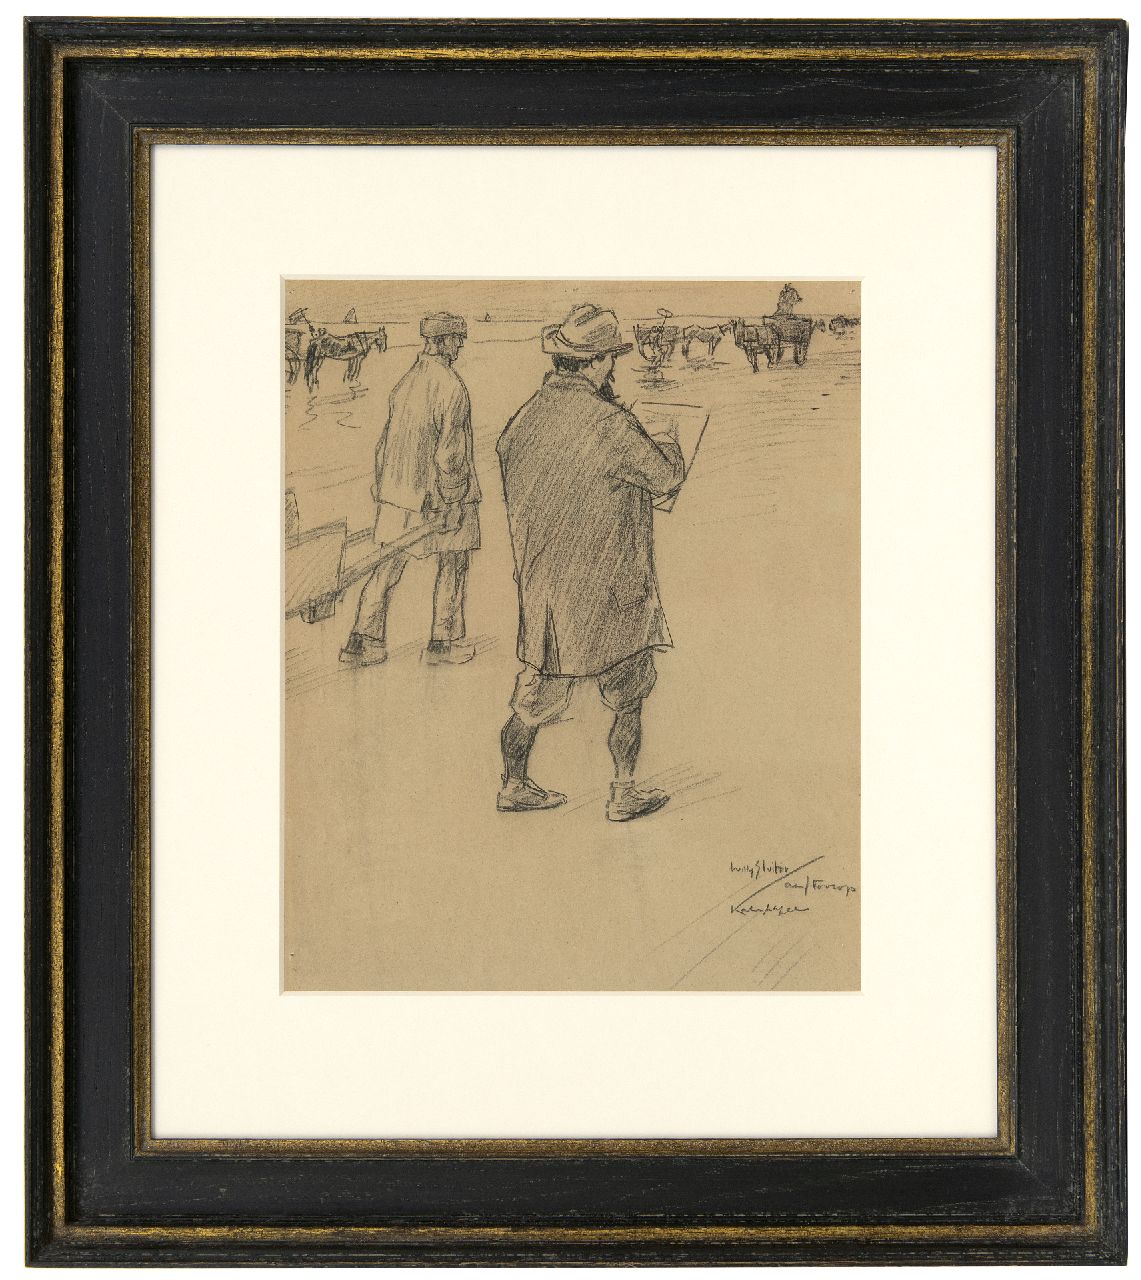 Sluiter J.W.  | Jan Willem 'Willy' Sluiter | Watercolours and drawings offered for sale | Jan Toorop sketching on the beach of Katwijk aan Zee, black chalk on paper 32.6 x 27.0 cm, signed l.r. and executed ca. 1898